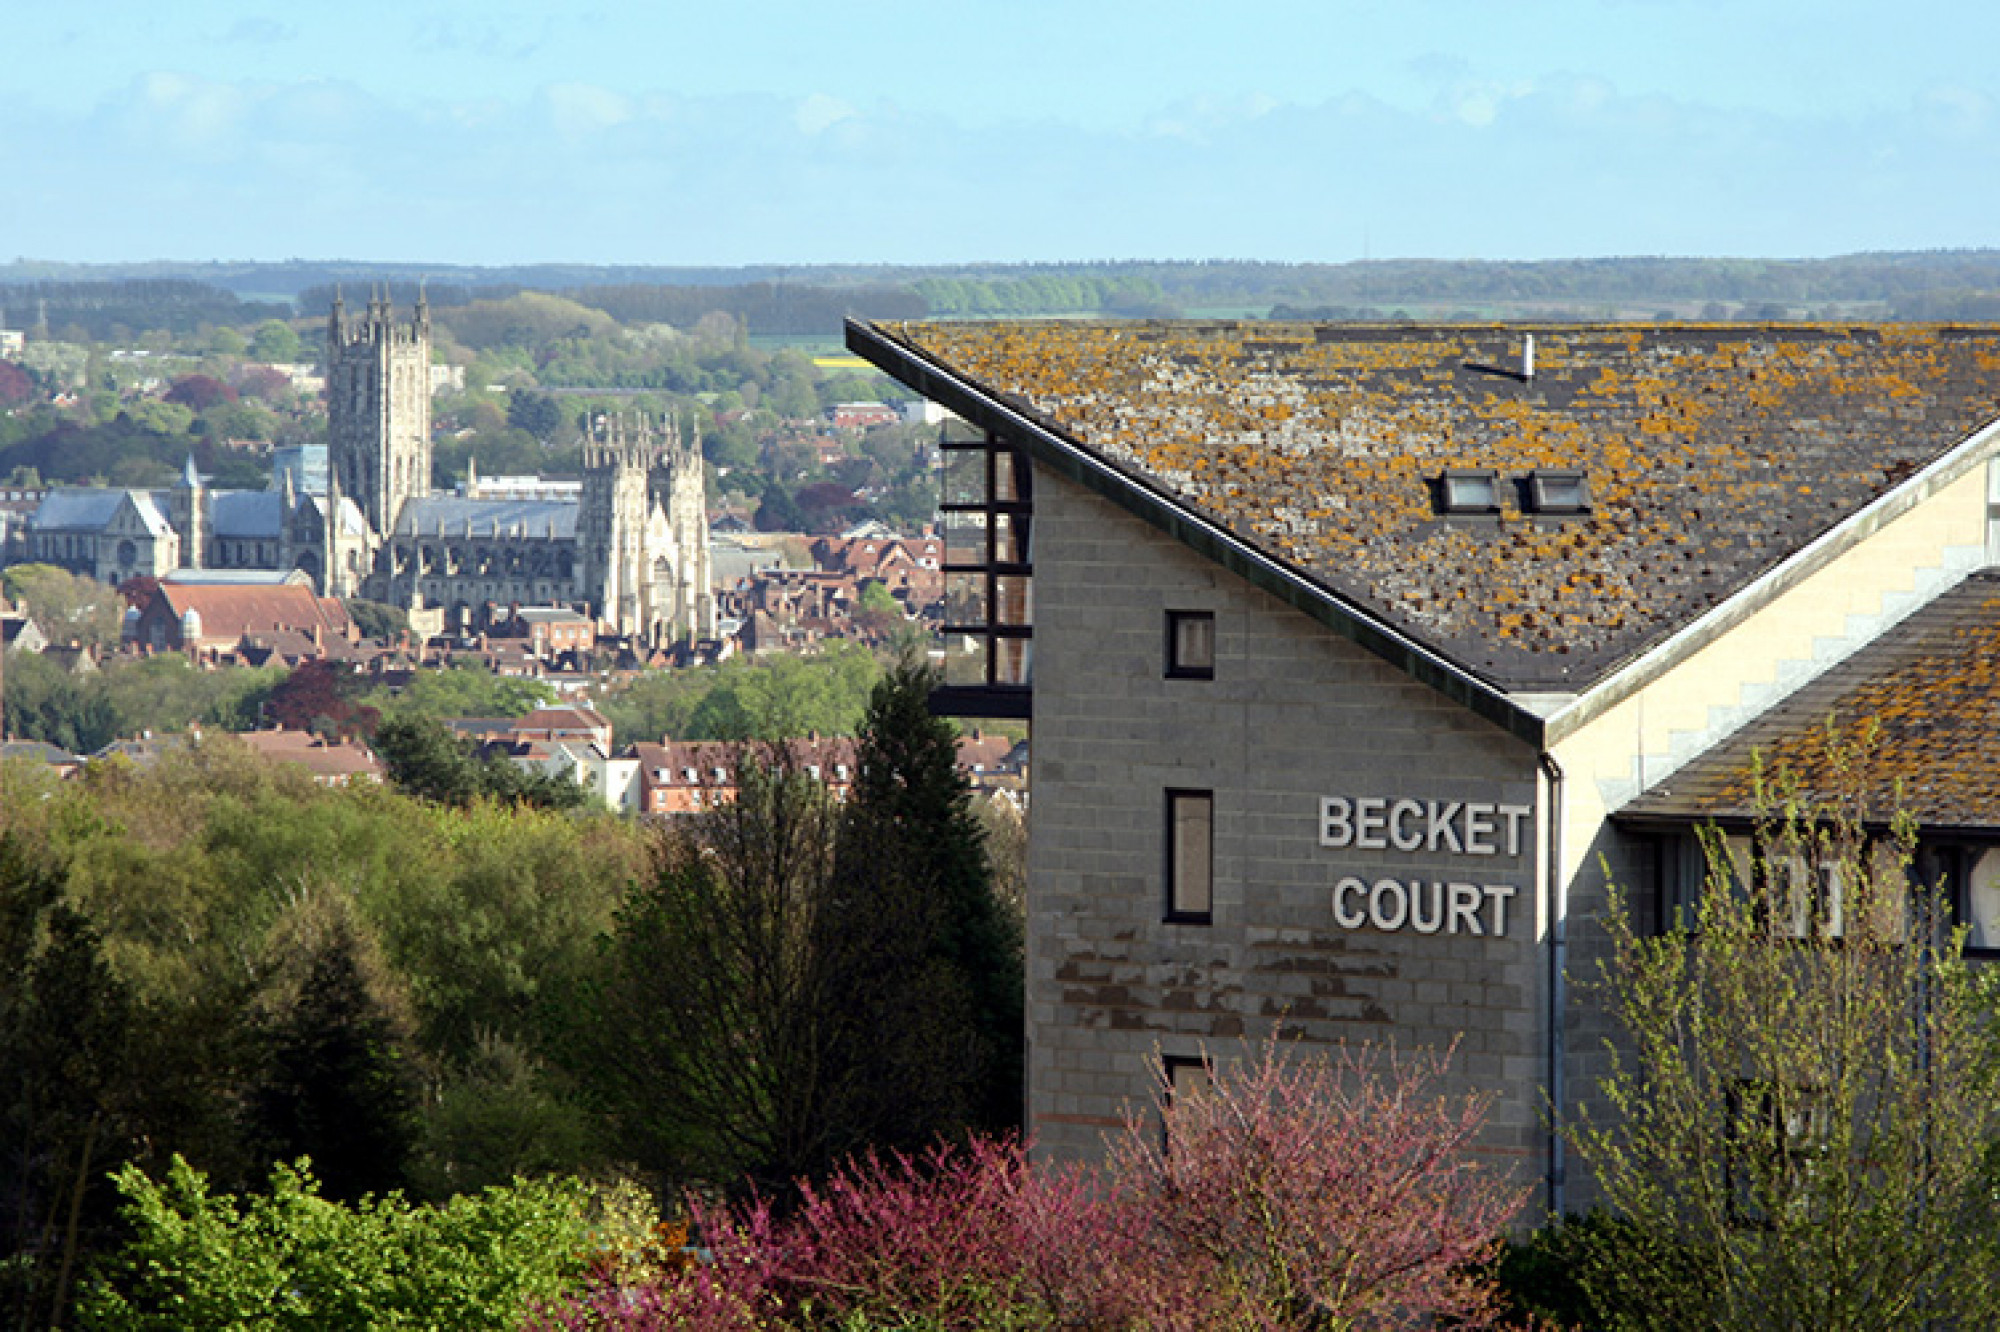 External shot of Becket Court with Canterbury Cathedral in background